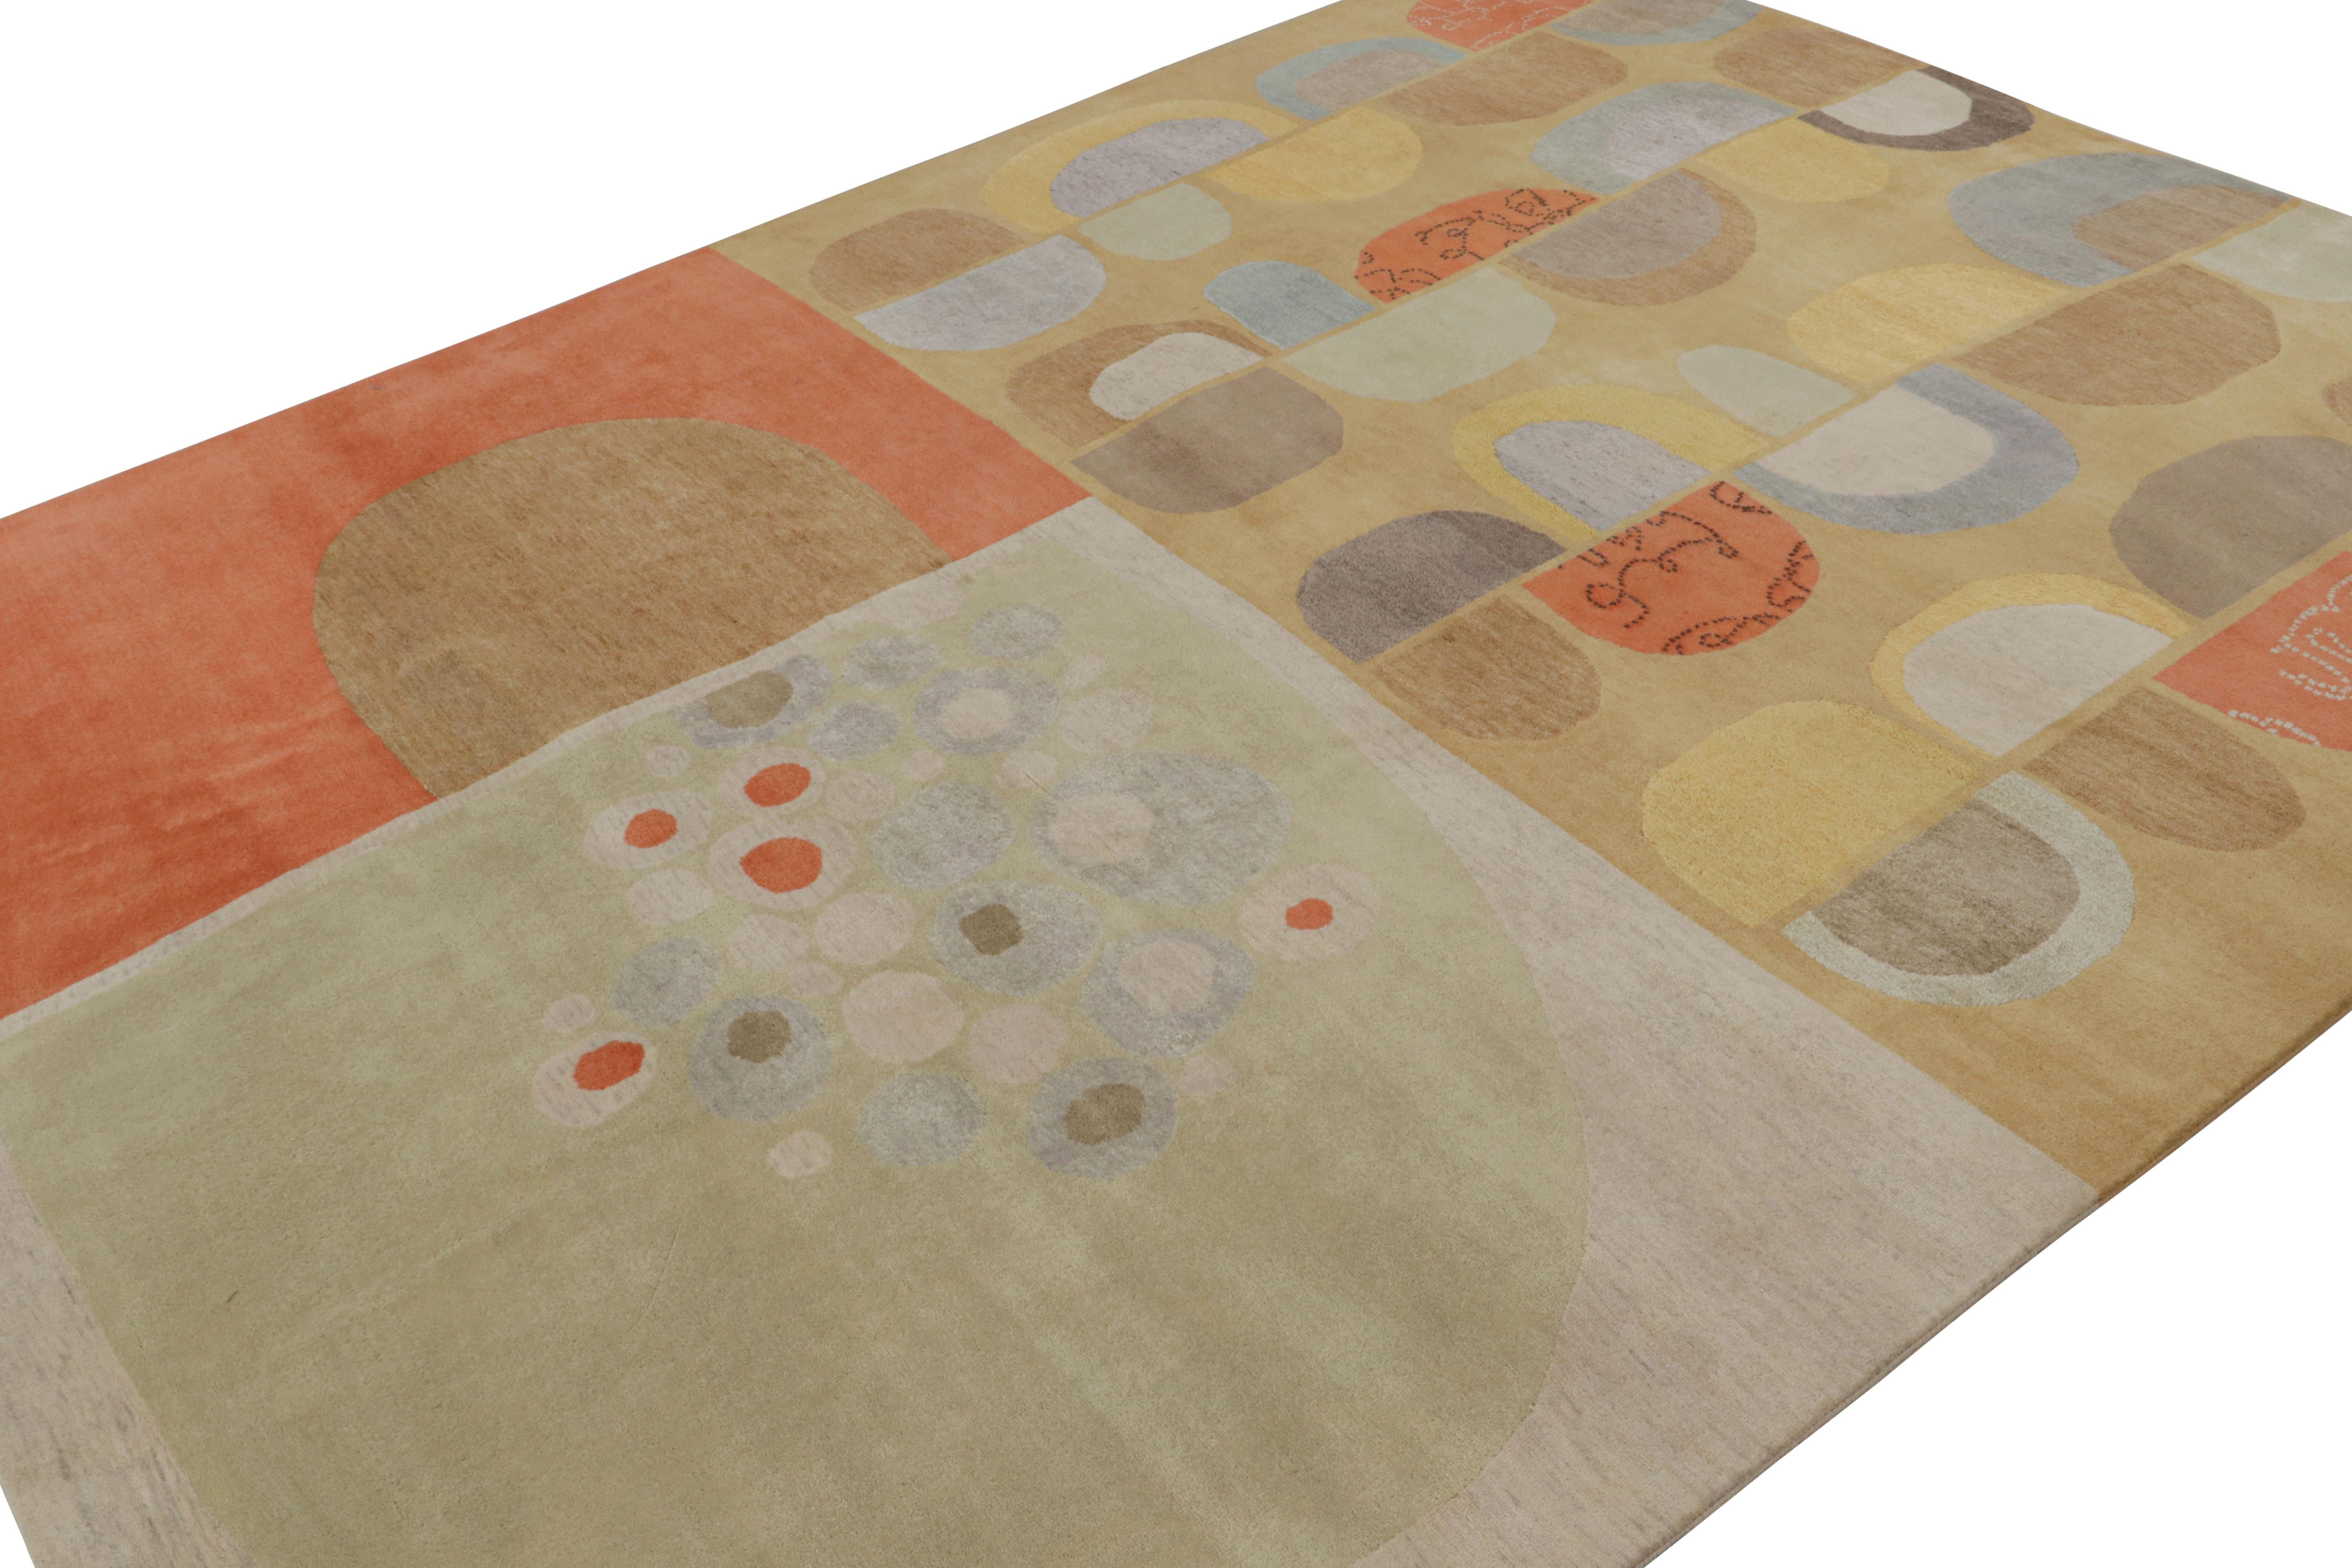 This hand-knotted wool and silk 8x10 modern rug represents an exclusive design from Rug & Kilim’s Mid-Century Modern rug collection. A collaboration with contemporary artist Jenn Ski, this piece is inspired by 1950s styles never-before represented